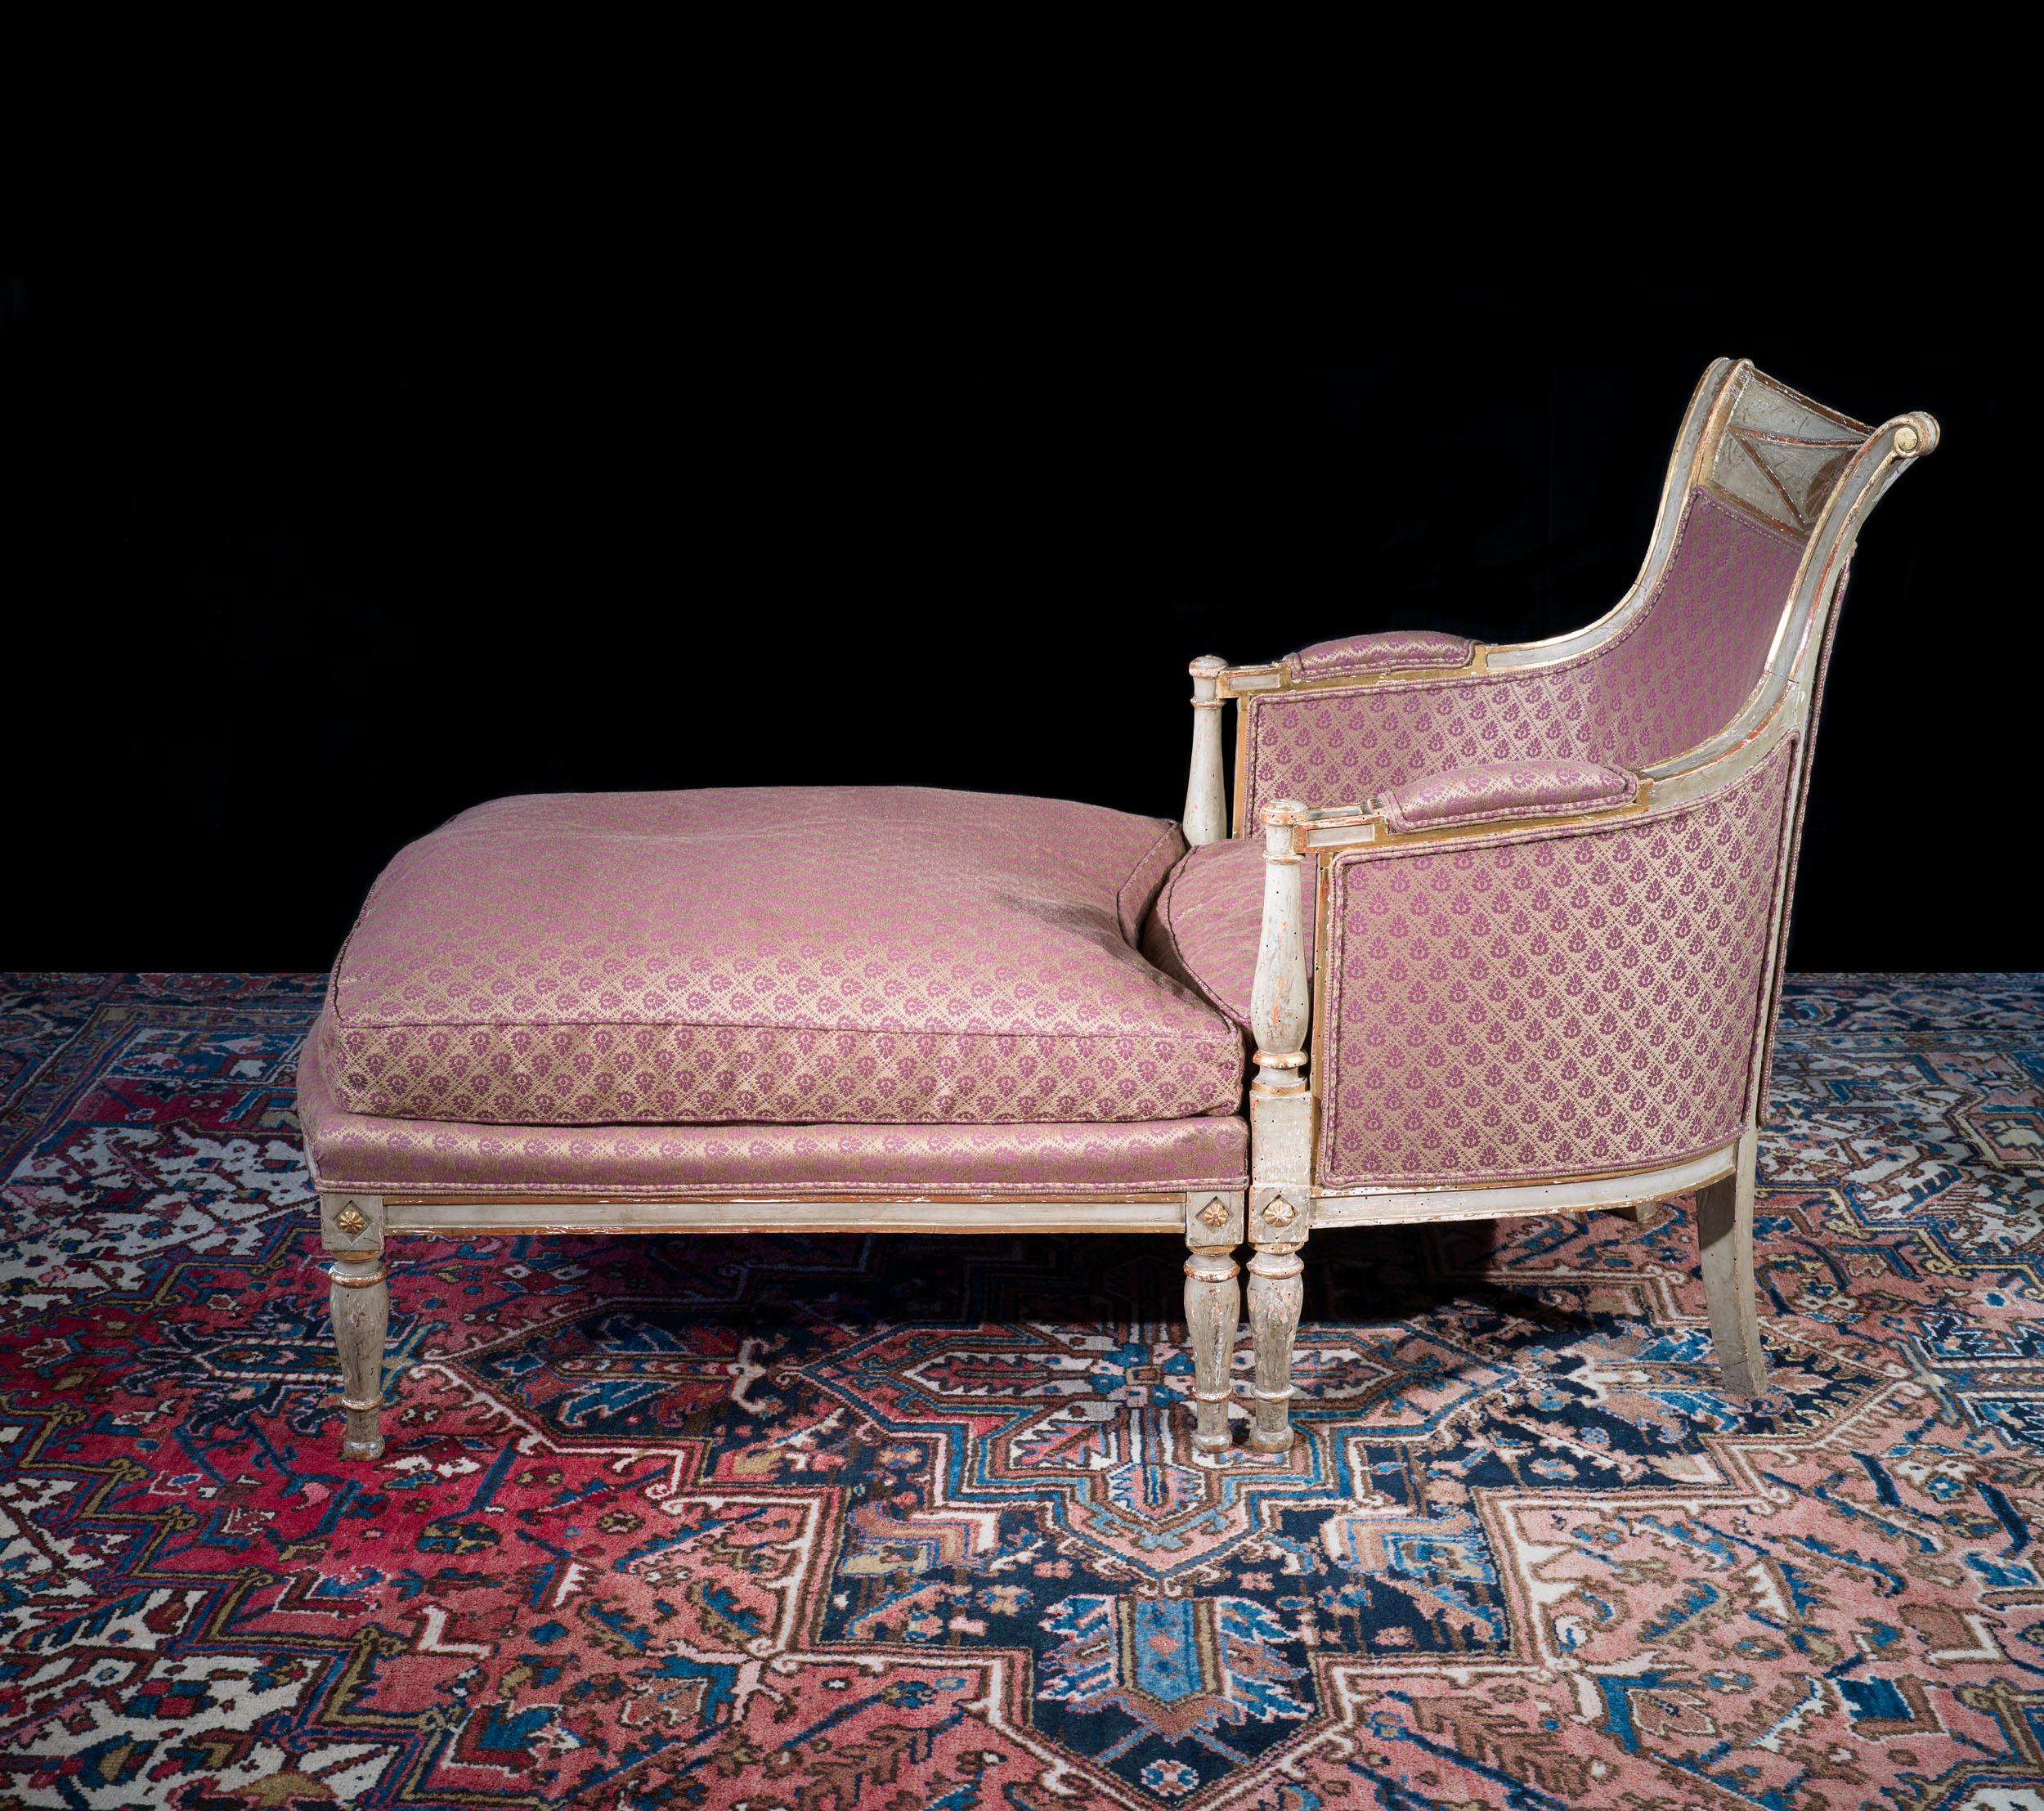 A fine early nineteenth-century French Empire period duchesse brisée armchair with accompanying footstool. This set is in the original paint with applied gilded highlights. The restrained form embraces the new Empire style that emerged shortly after